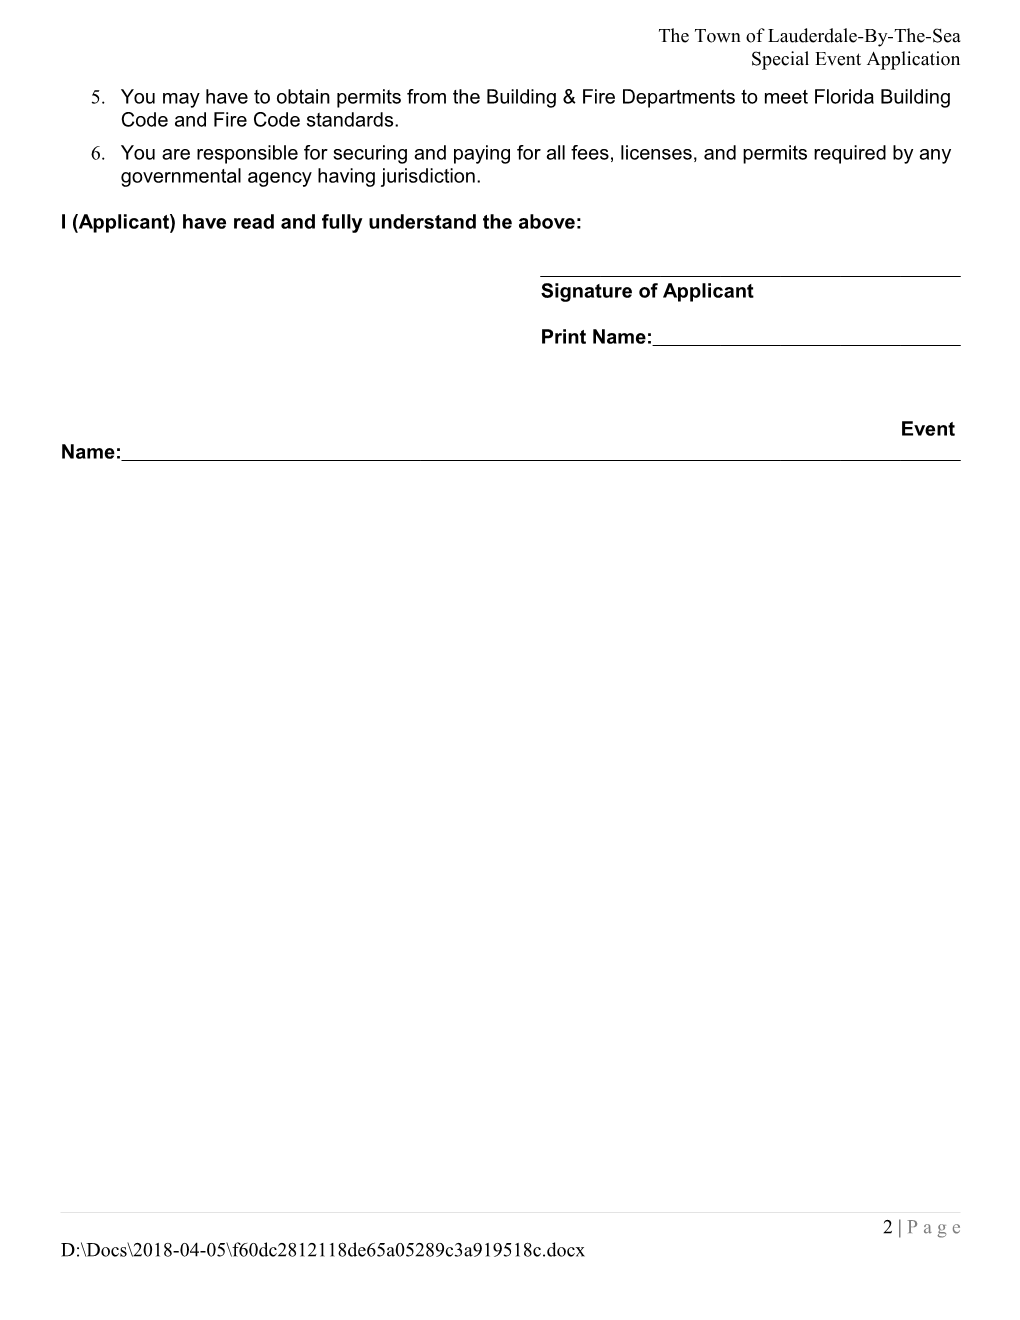 Special Events Application